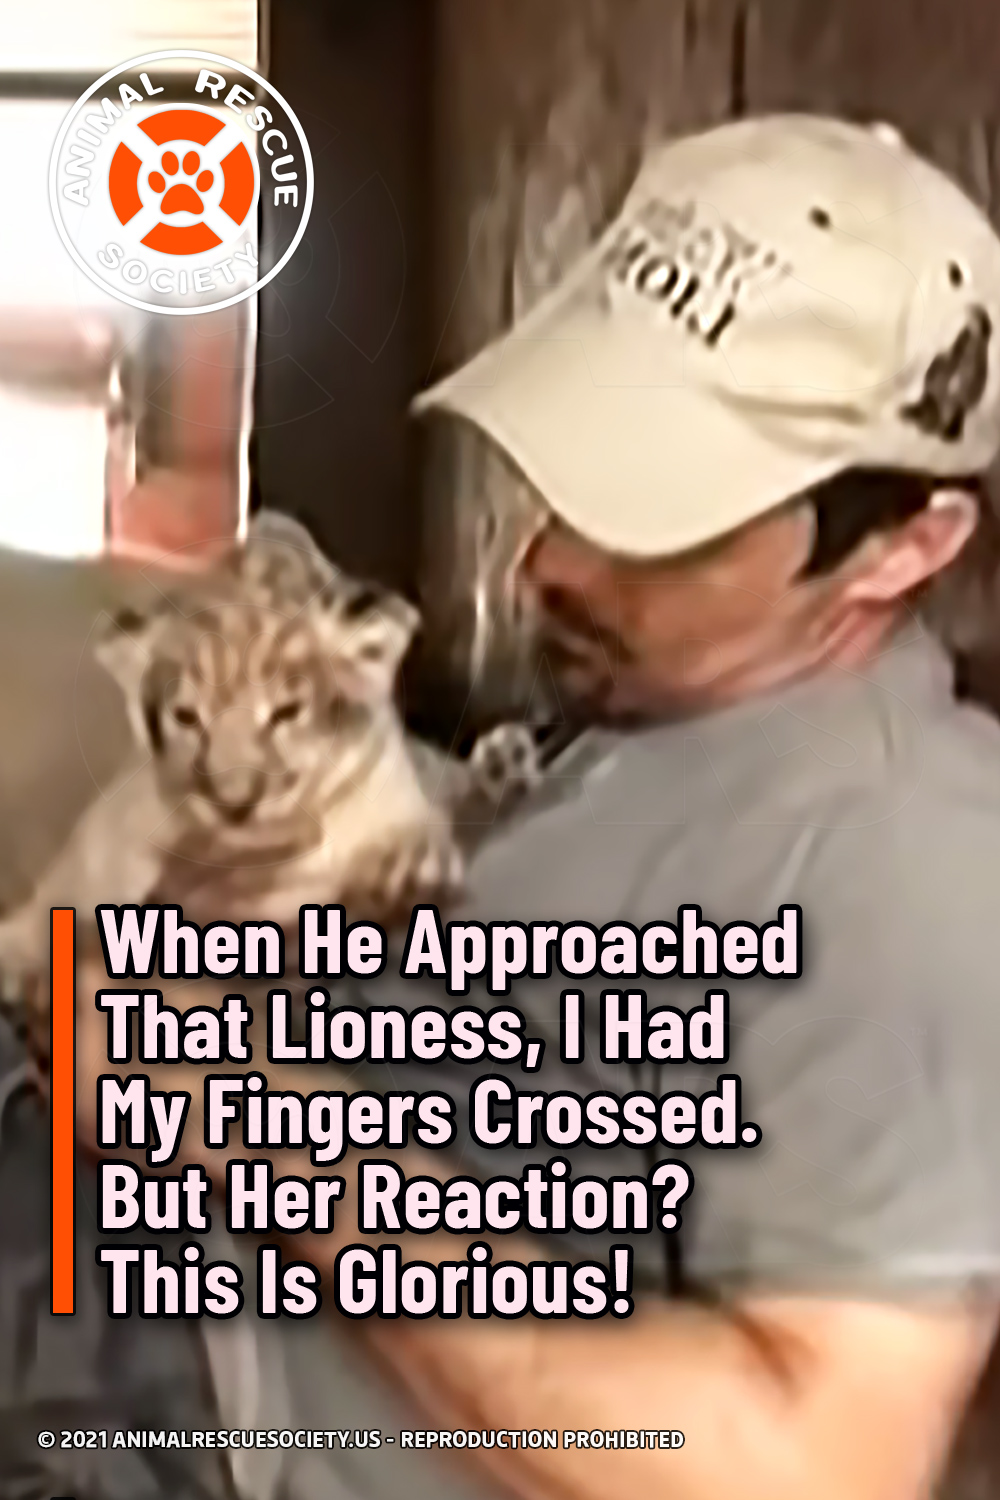 When He Approached That Lioness, I Had My Fingers Crossed. But Her Reaction? This Is Glorious!